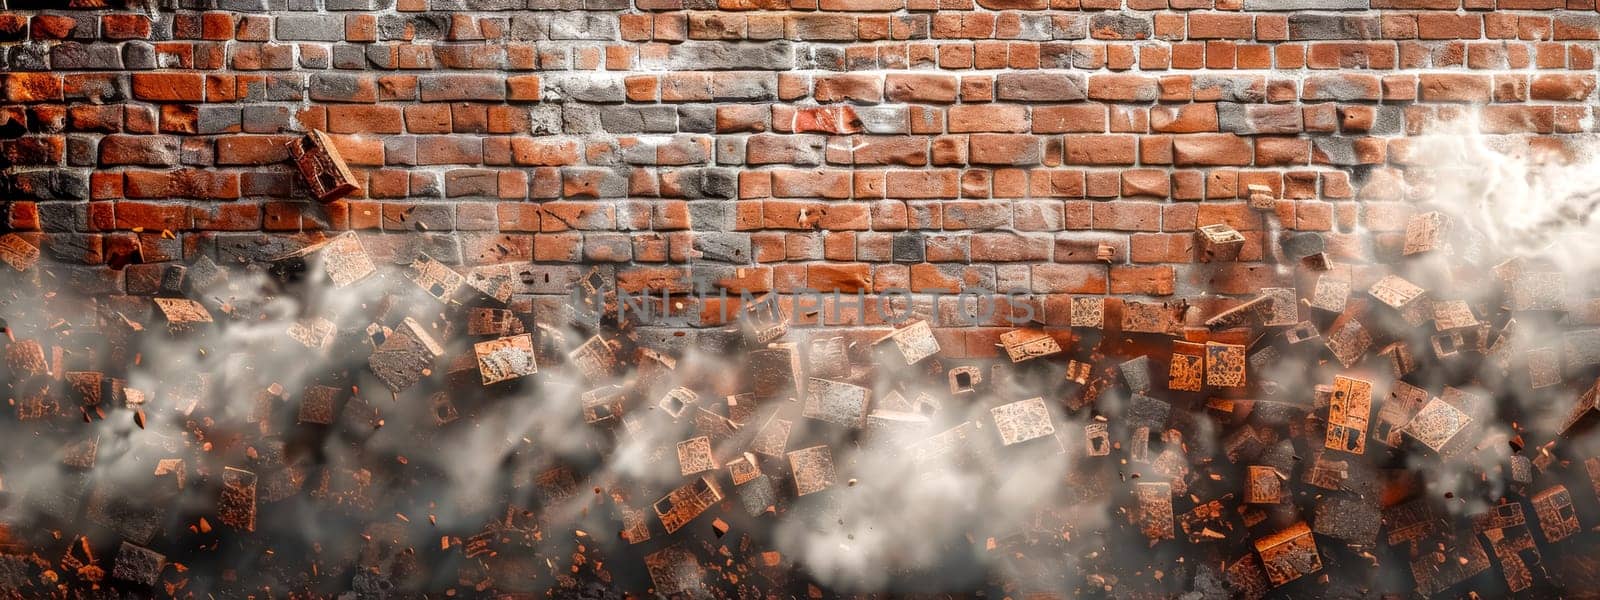 Exploding brick wall with flying debris and dust by Edophoto